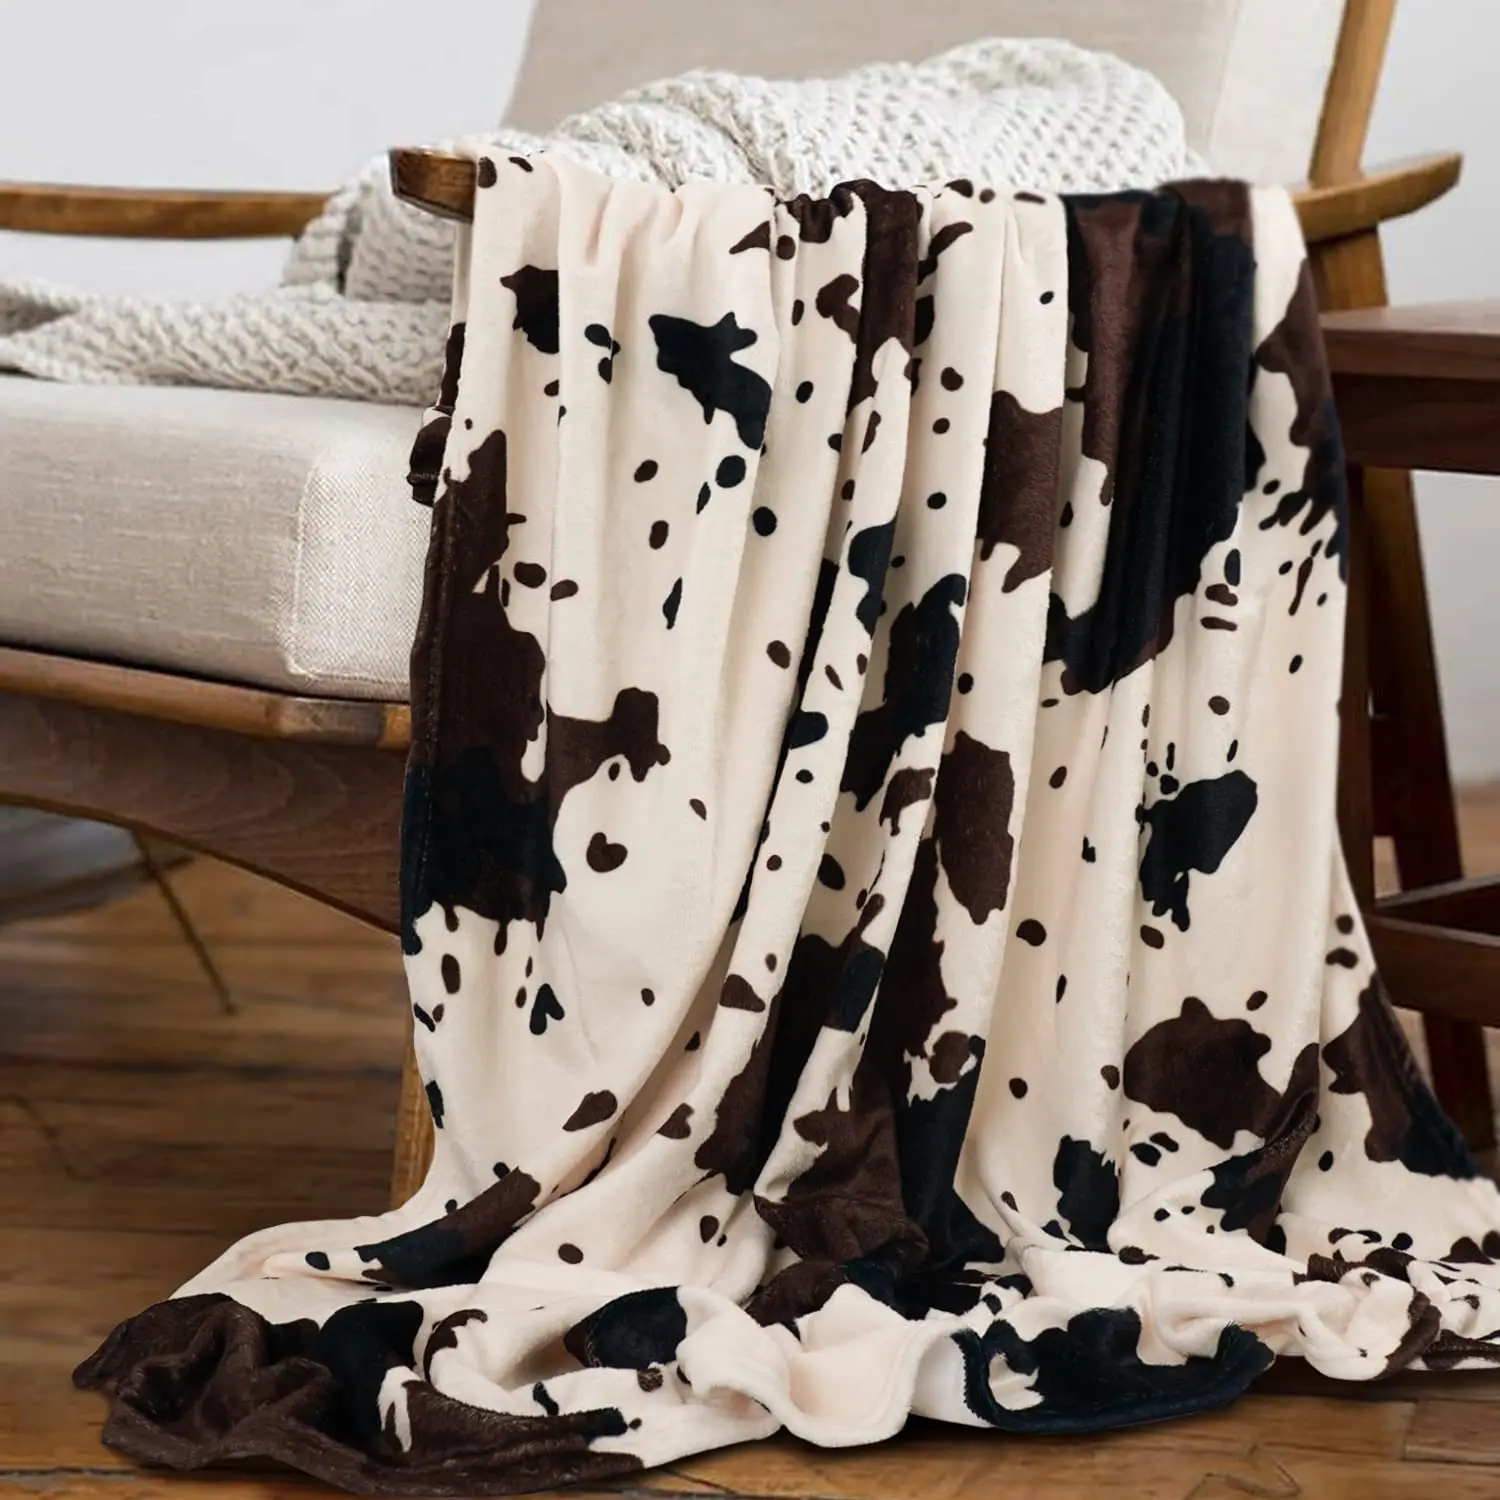 Cow Print Blanket Black White Bed Cow Throw Blankets Soft Sofa Cozy Warm Plush Gifts for Bedroom Decor Highland Cattle Bedspread images - 6